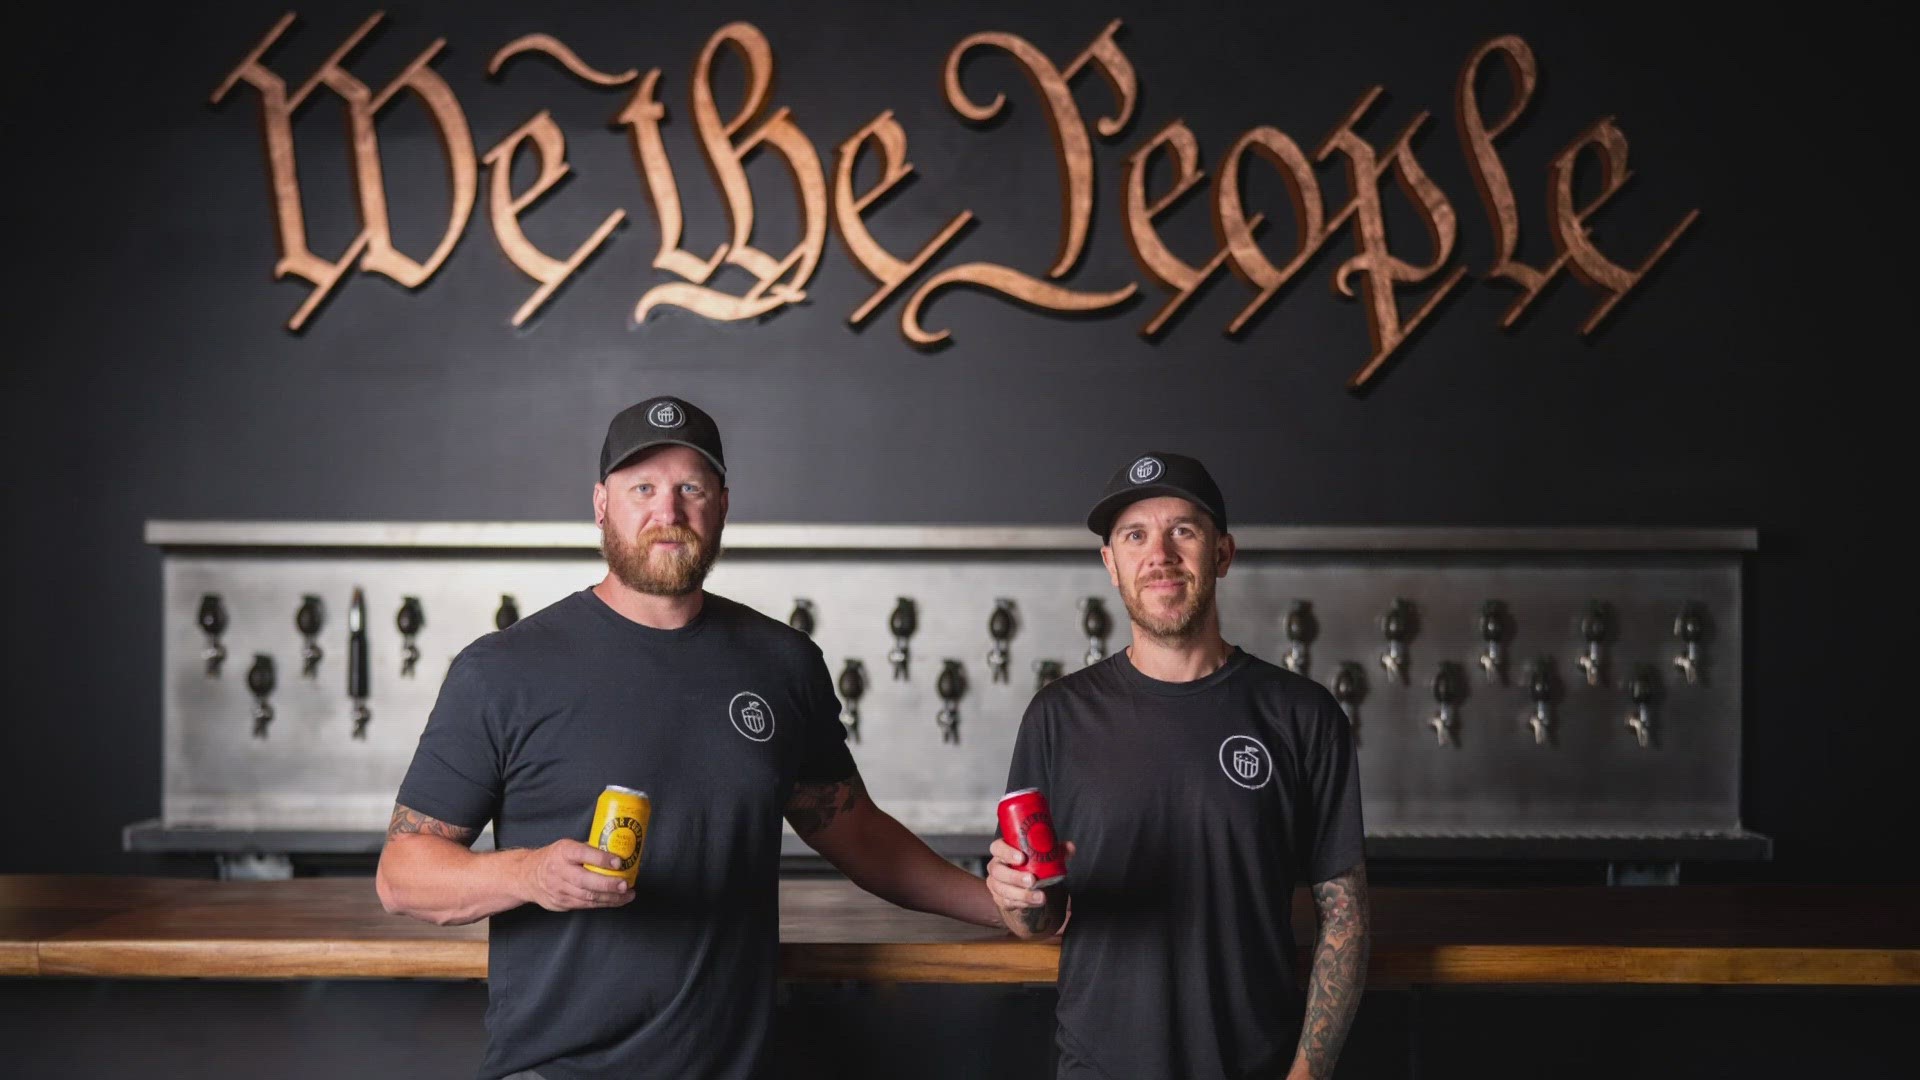 Cider Corps is a Veteran owned and operated taproom in Mesa. The owner says their mission is to drink great cider and honor great sacrifice.